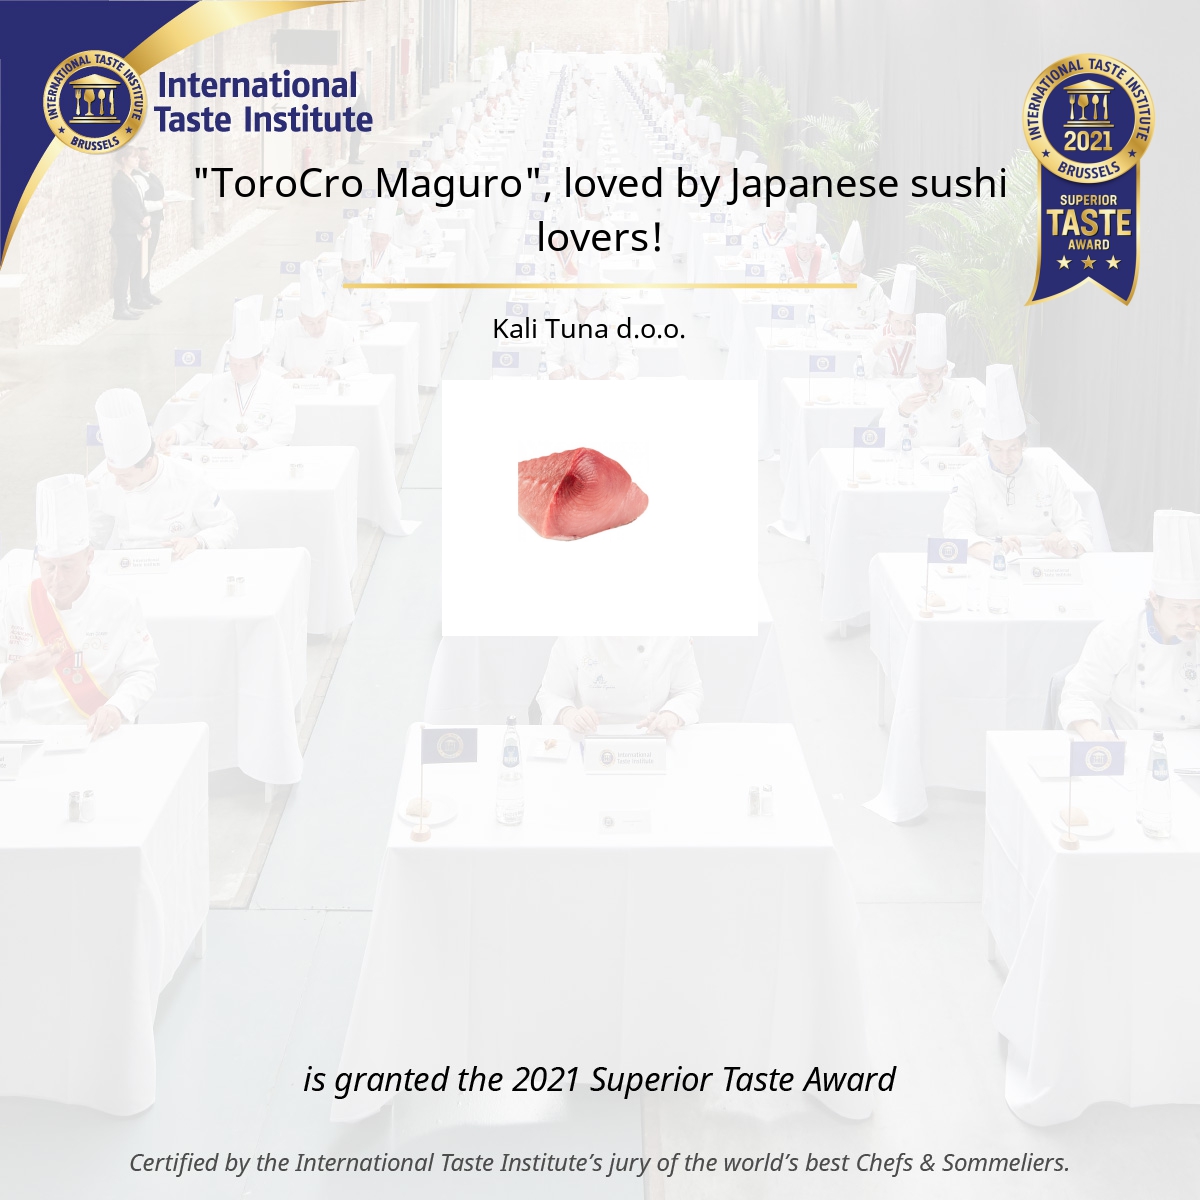 Square image of "ToroCro Maguro", loved by Japanese sushi lovers!